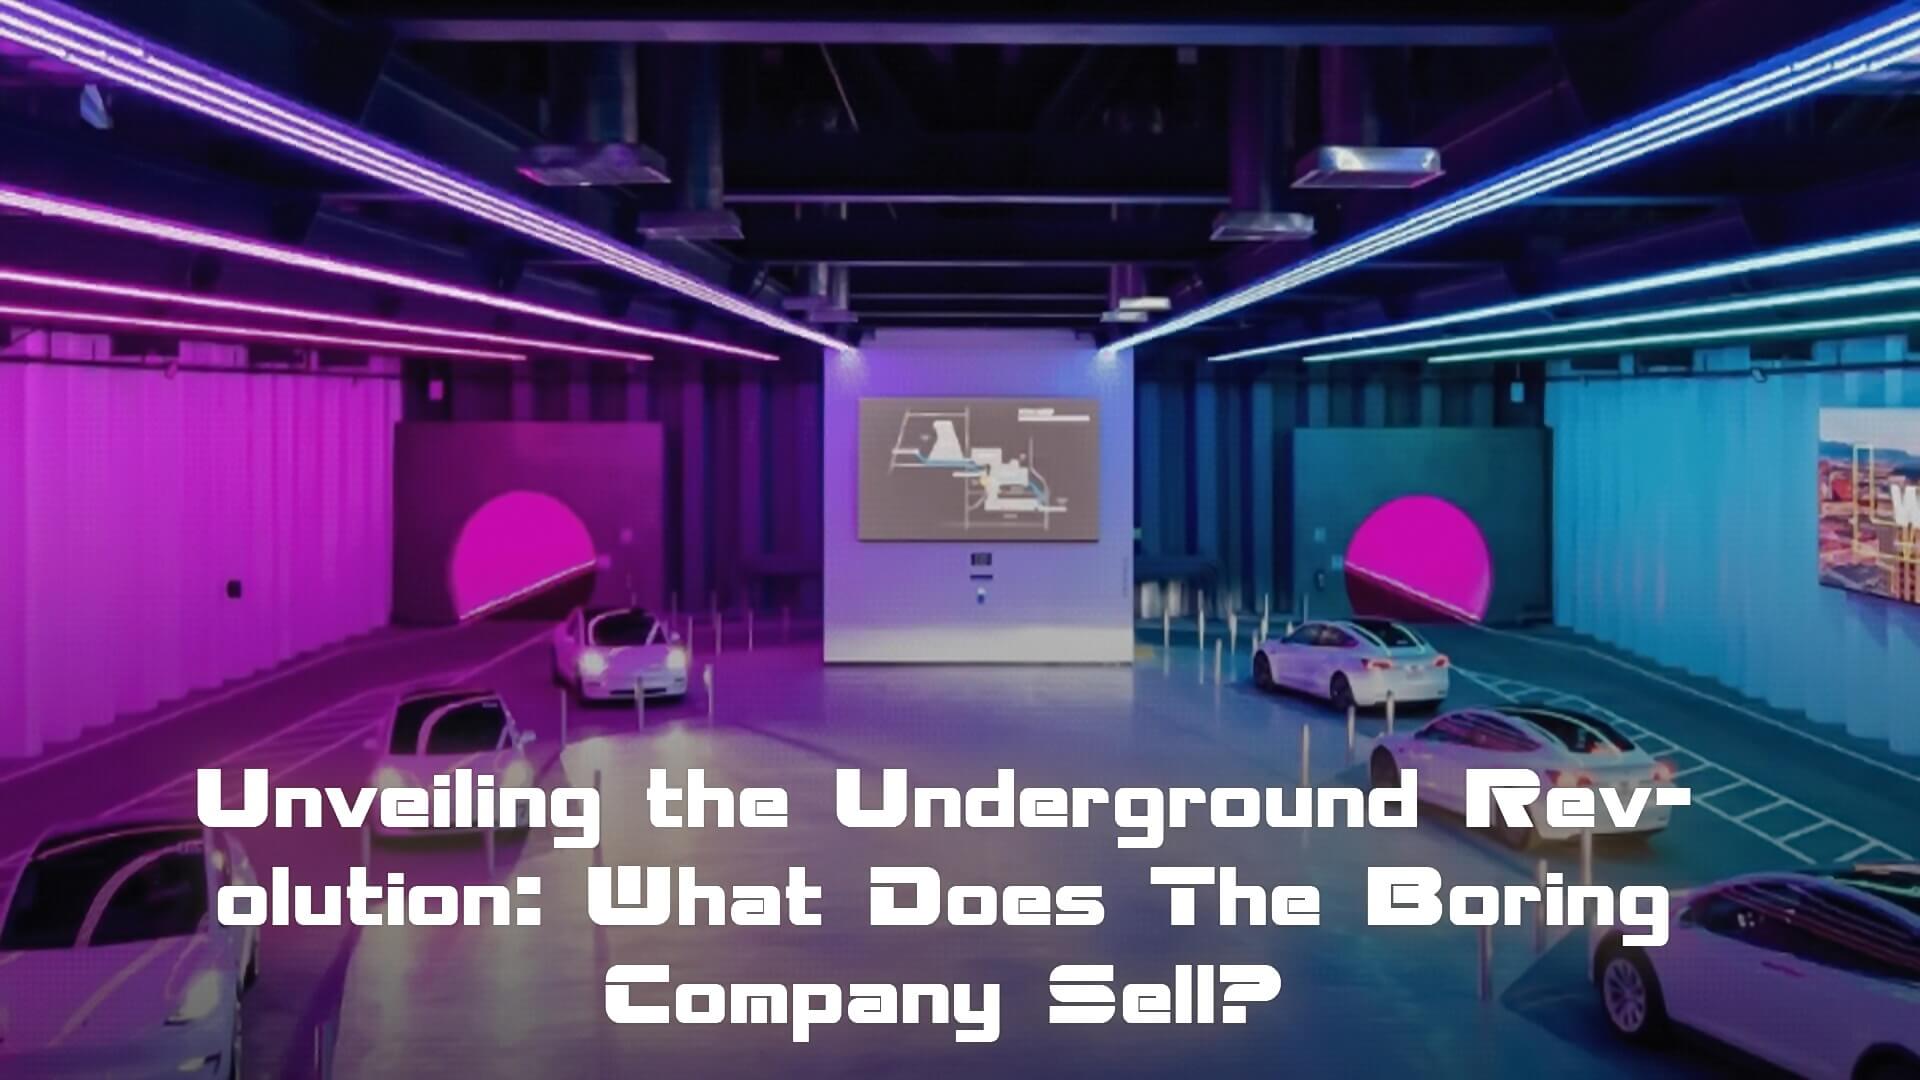 Unveiling the Underground Revolution: What Does The Boring Company Sell?